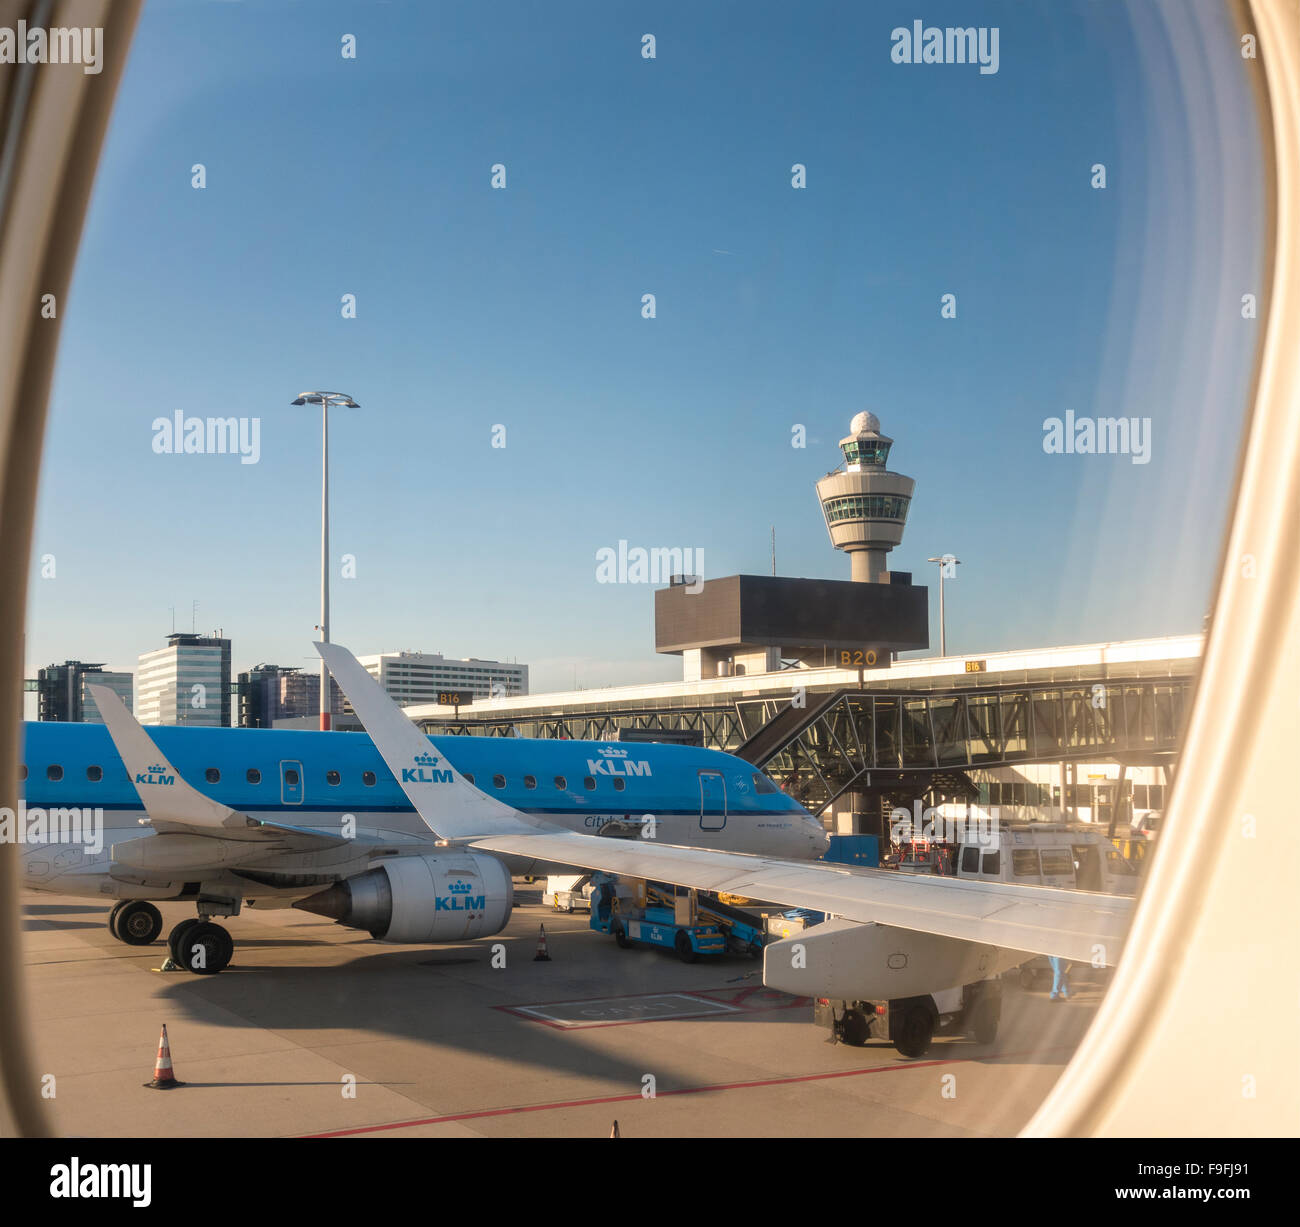 Schiphol Amsterdam Airport with KLM Cityhopper PH-EZO Embraer E-190 plane at the gate and control tower. View from a window seat Stock Photo